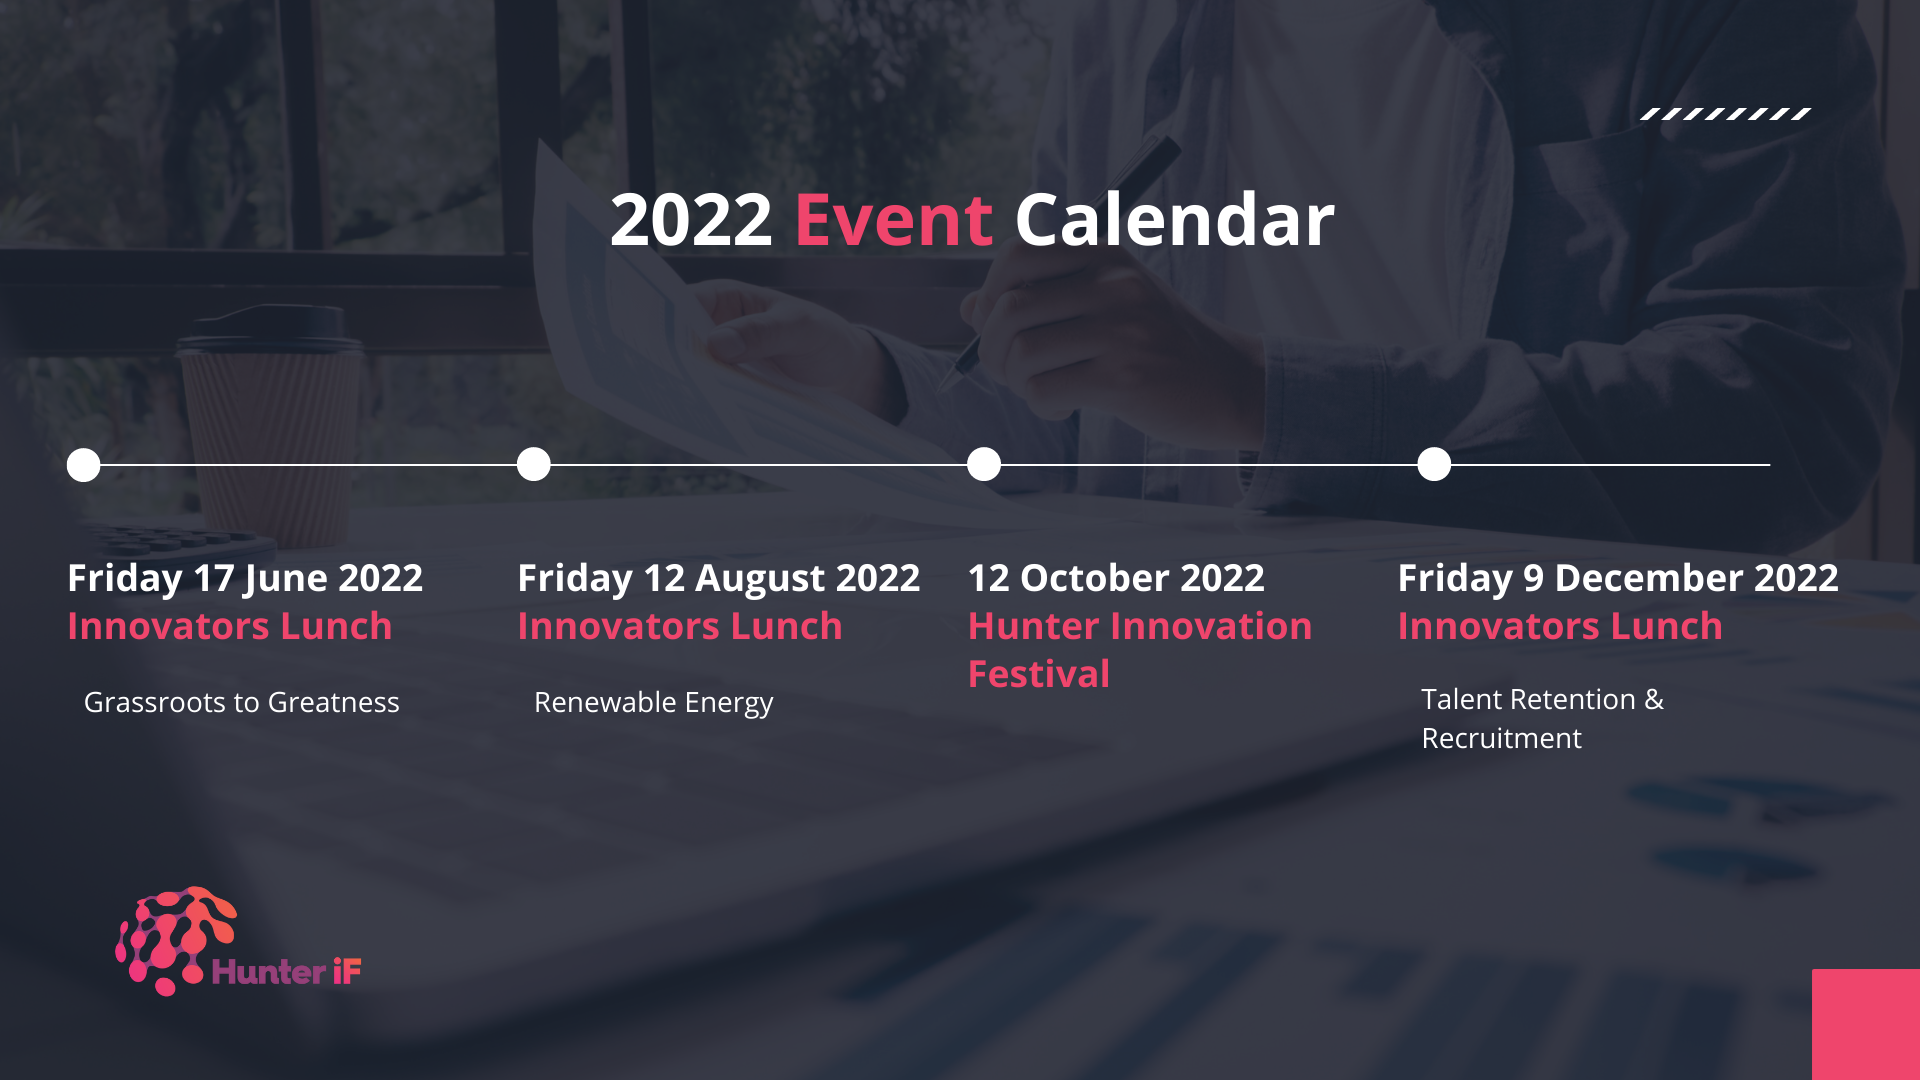 Calendar of events for 2022 Hunter iF Limited Innovation in Greater